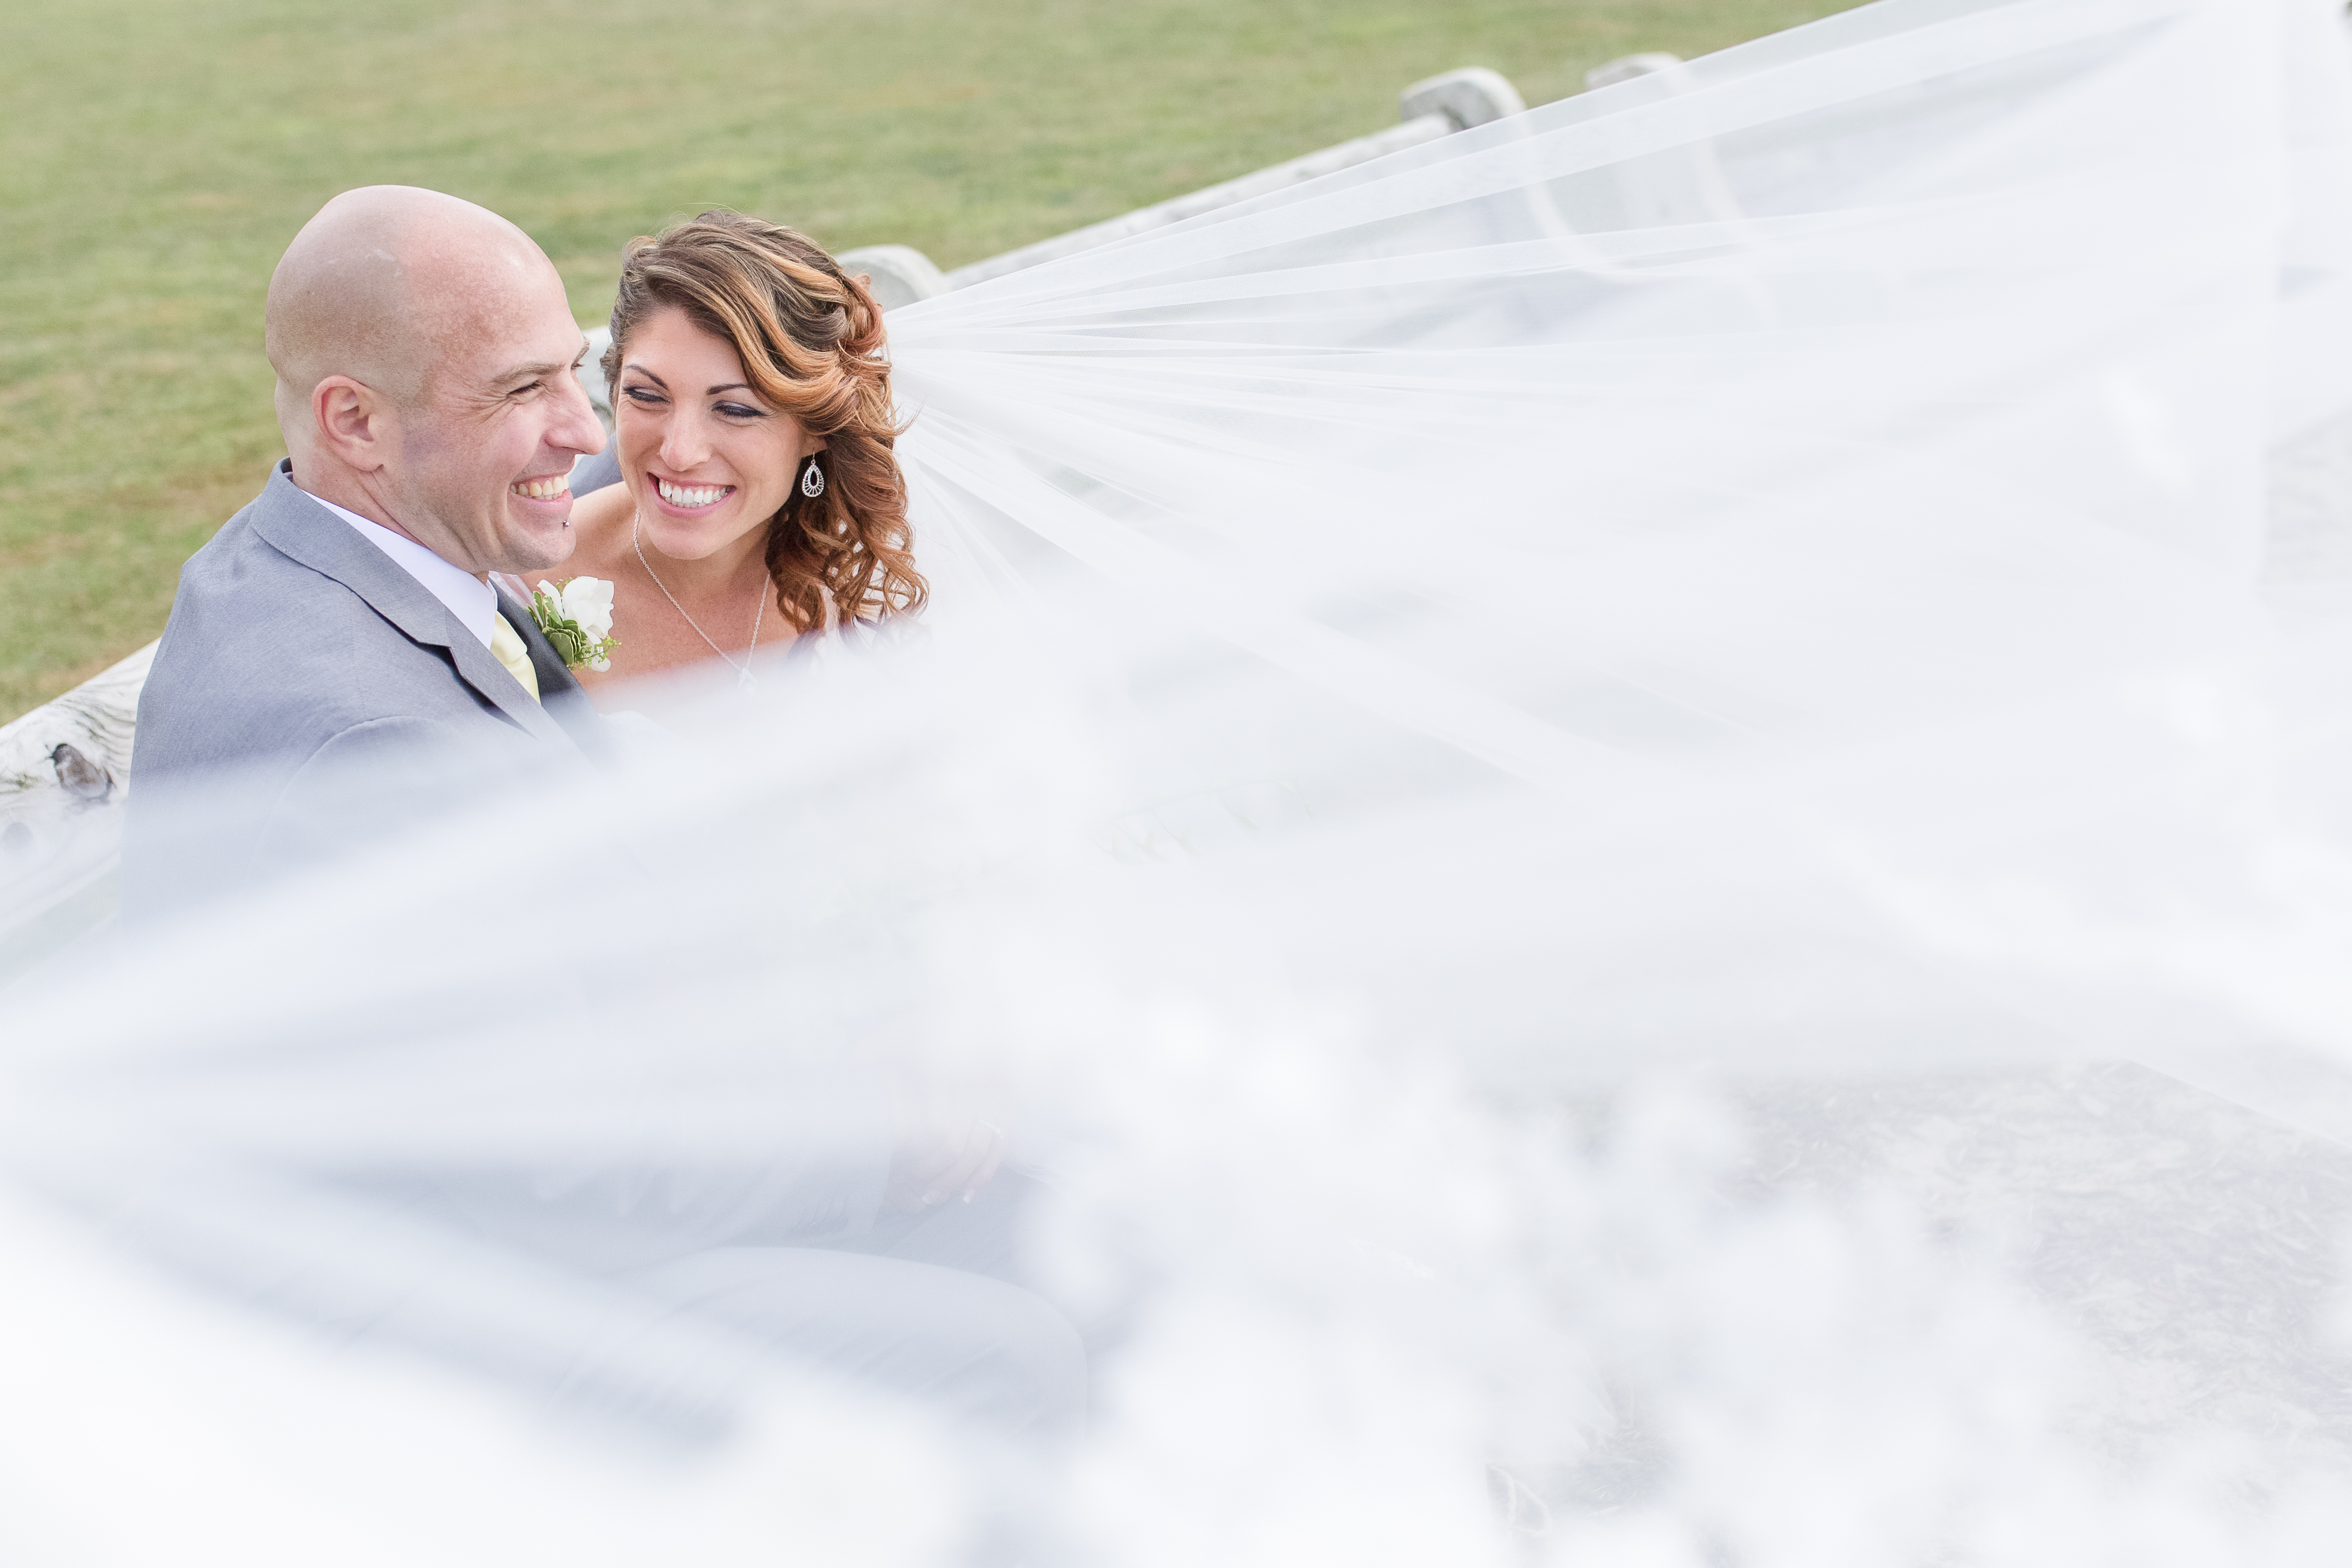 bridal-portrait-on-the-bay-lavallette-gazebo-wedding-imagery-by-marianne-2015